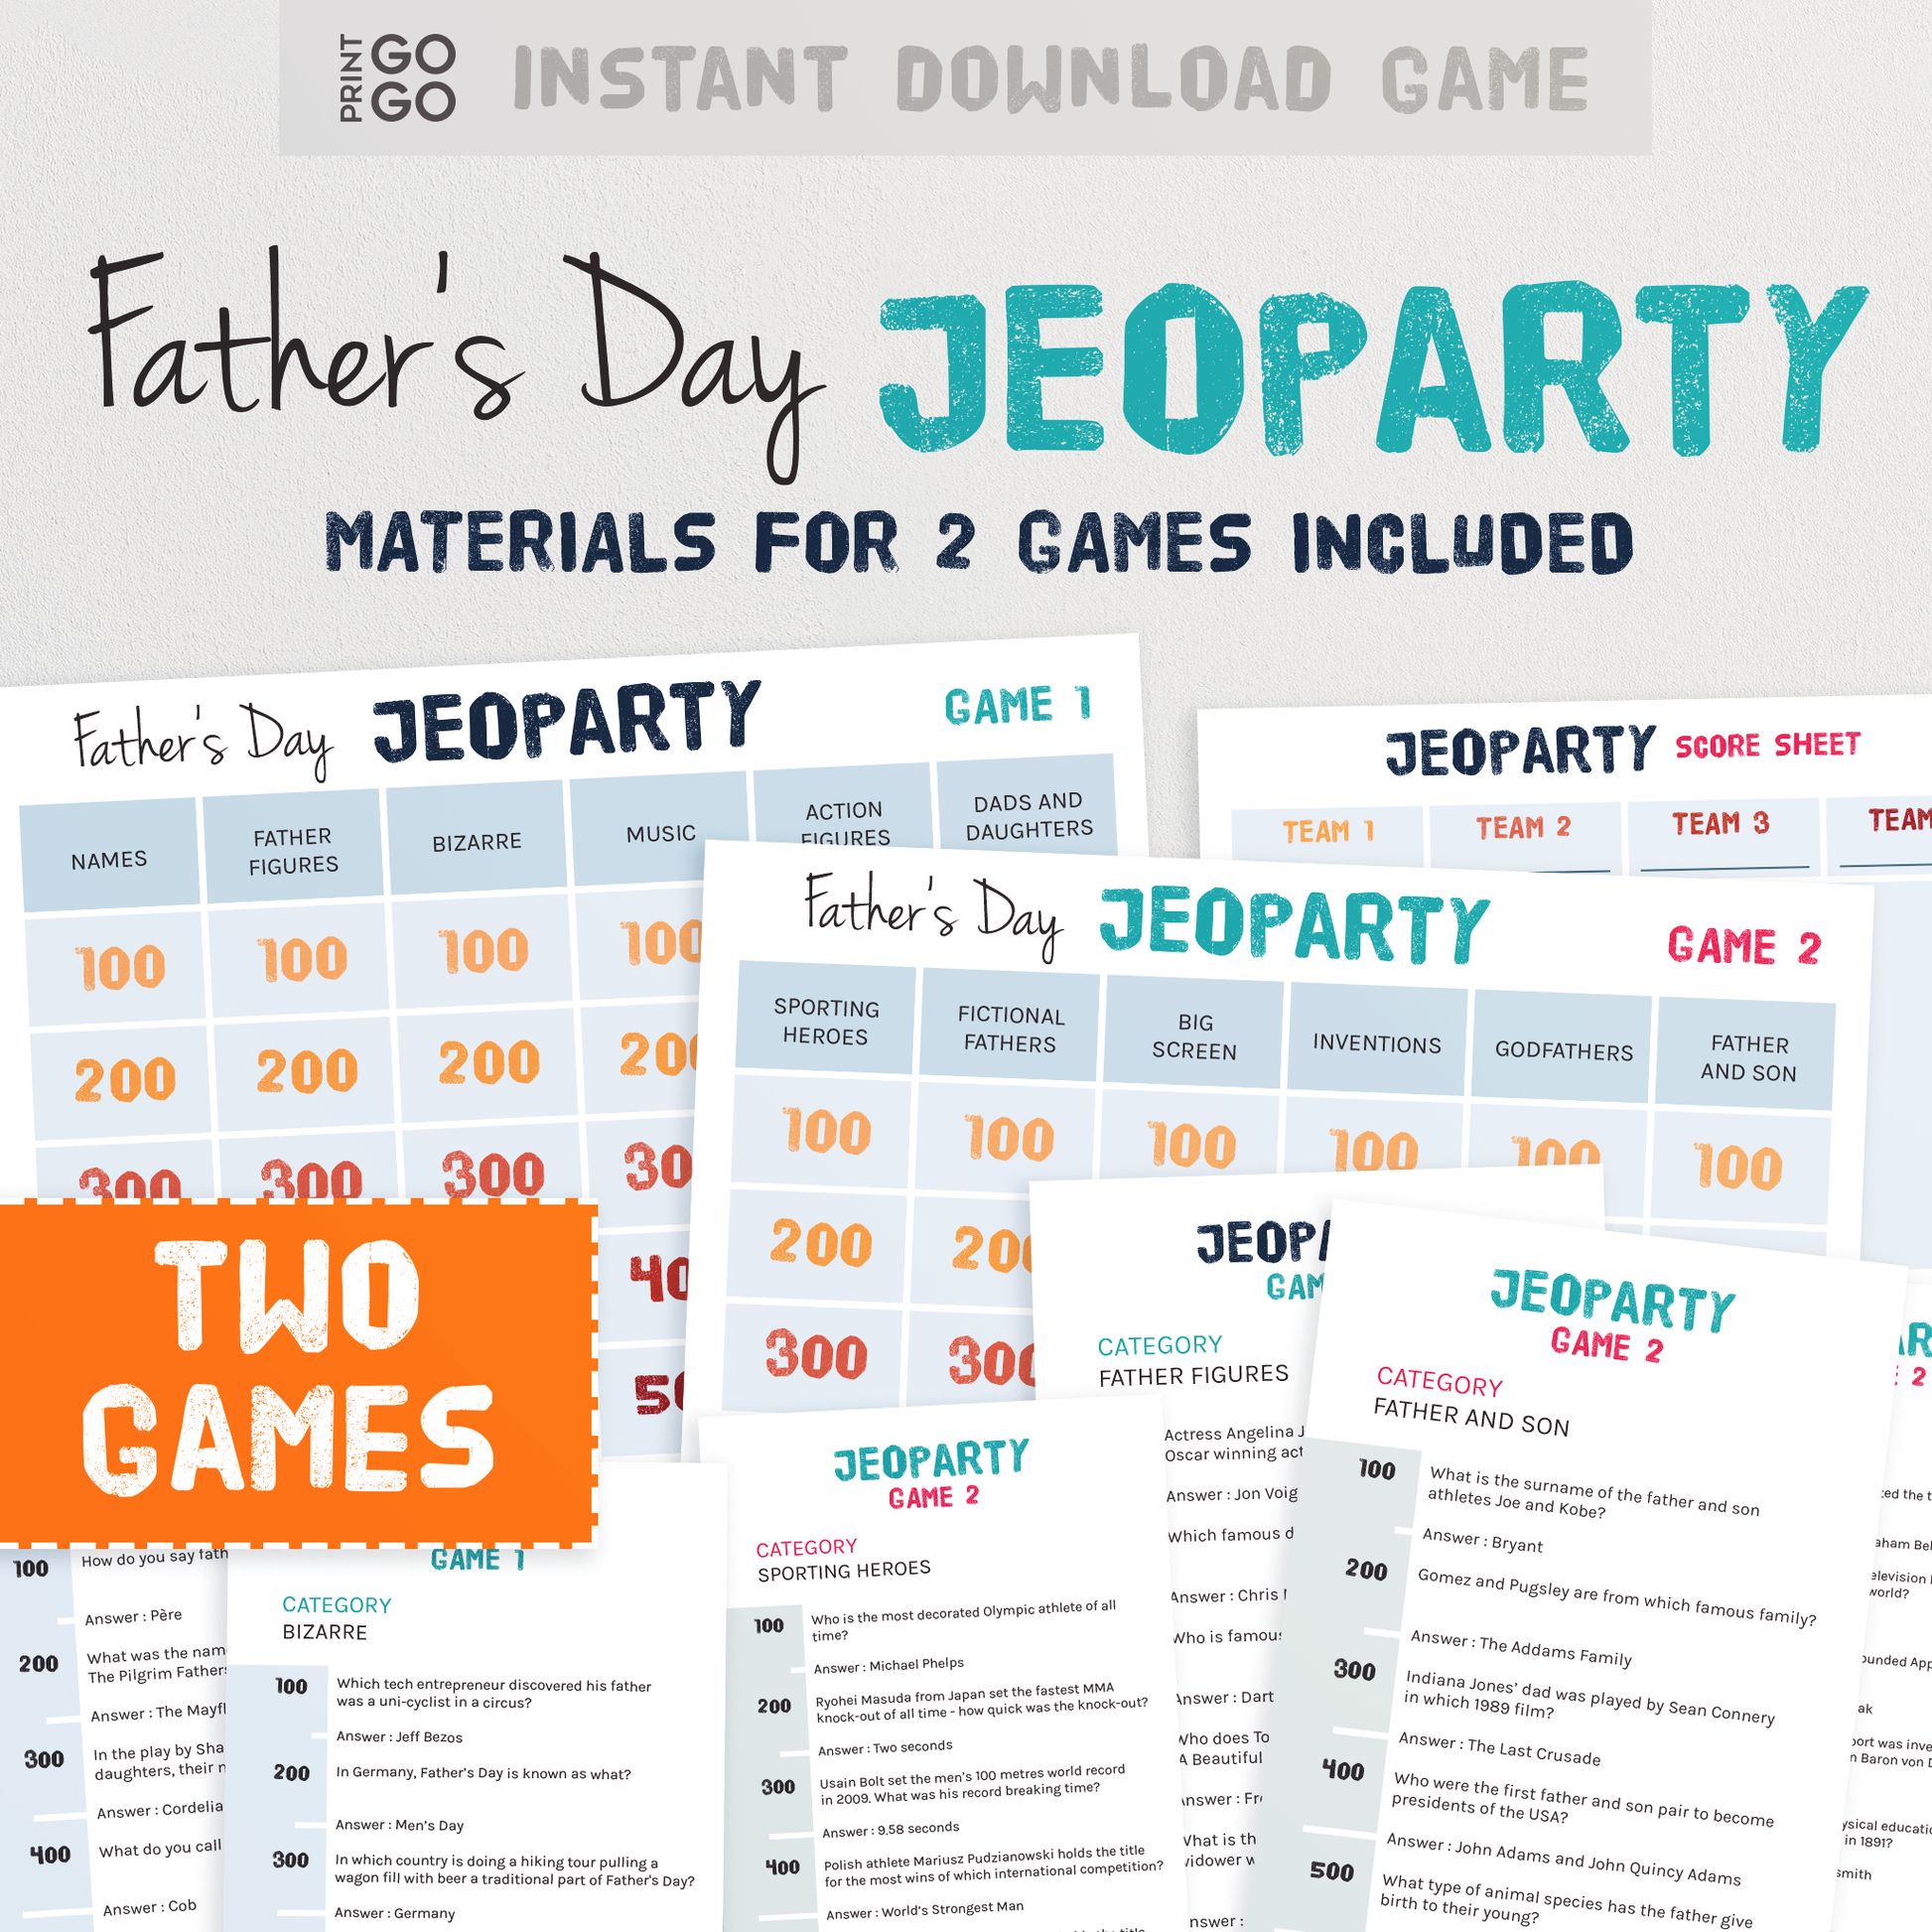 Father's Day Jeoparty Trivia Game - The Fun Party Quiz To Print and Play at Home